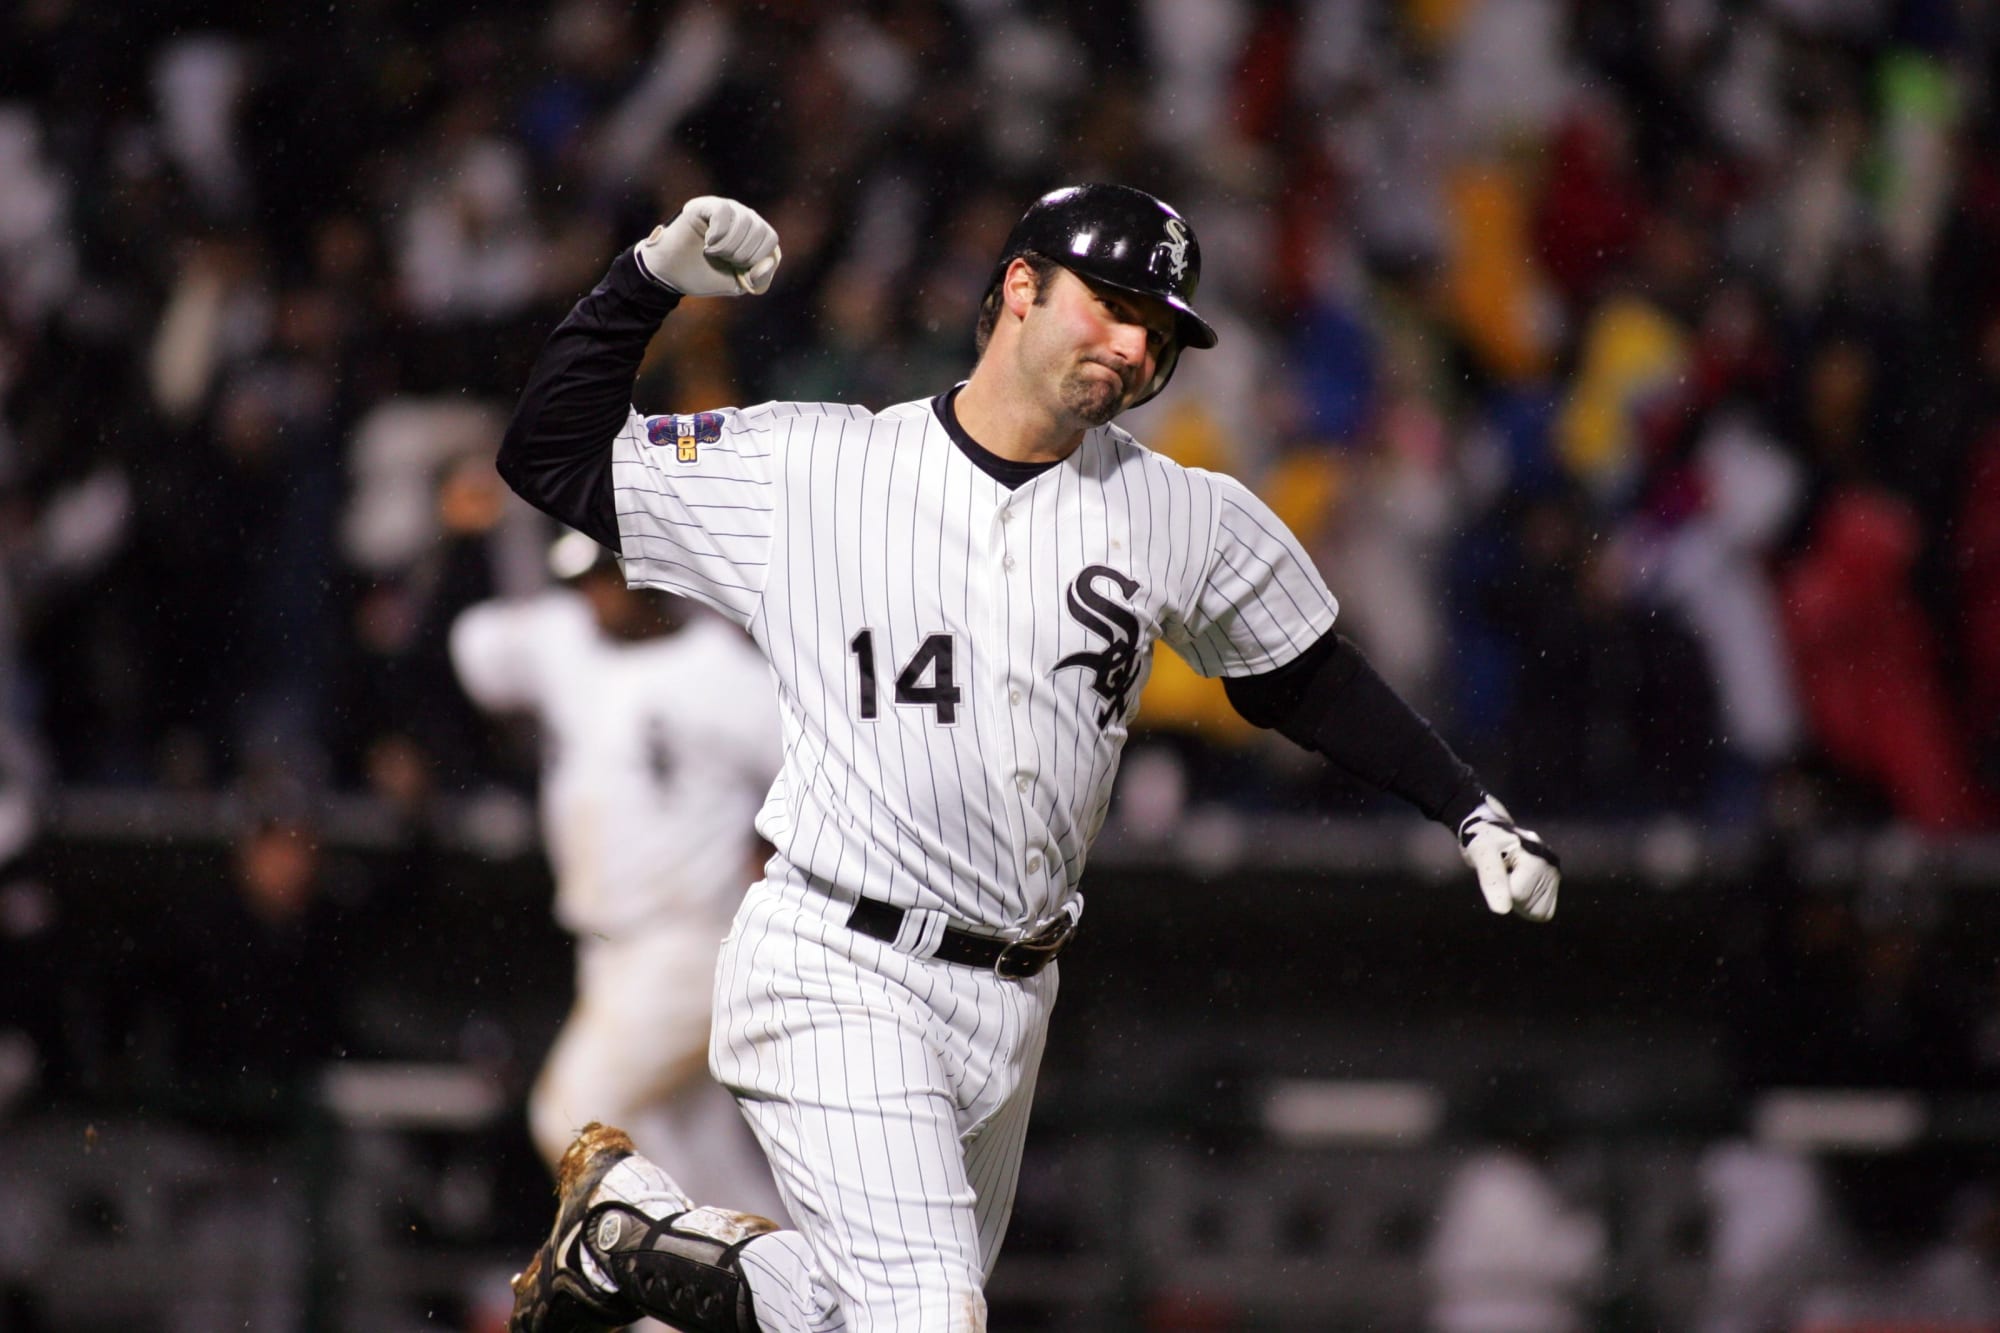 Chicago White Sox: The Houston Astros won't touch the 2005